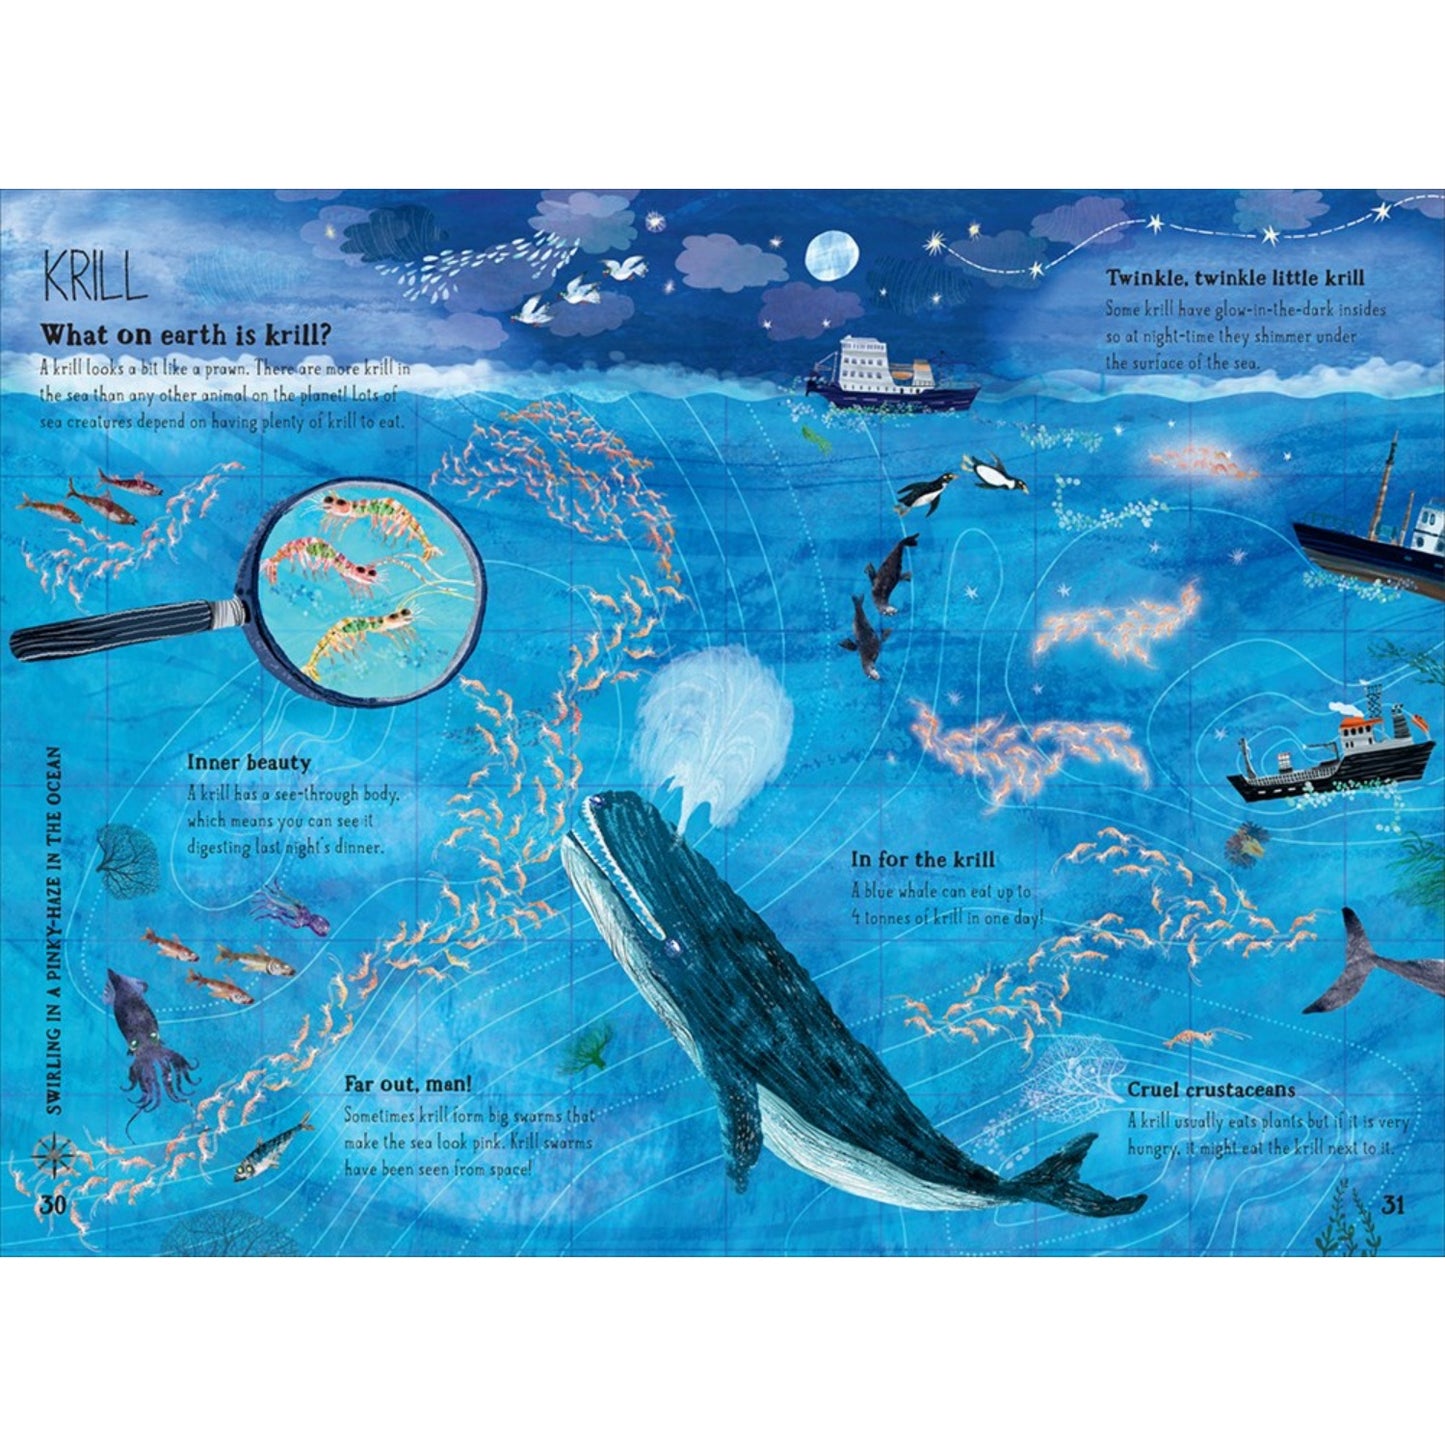 The Big Book of the Blue | Children's Picture Book on Marine Life